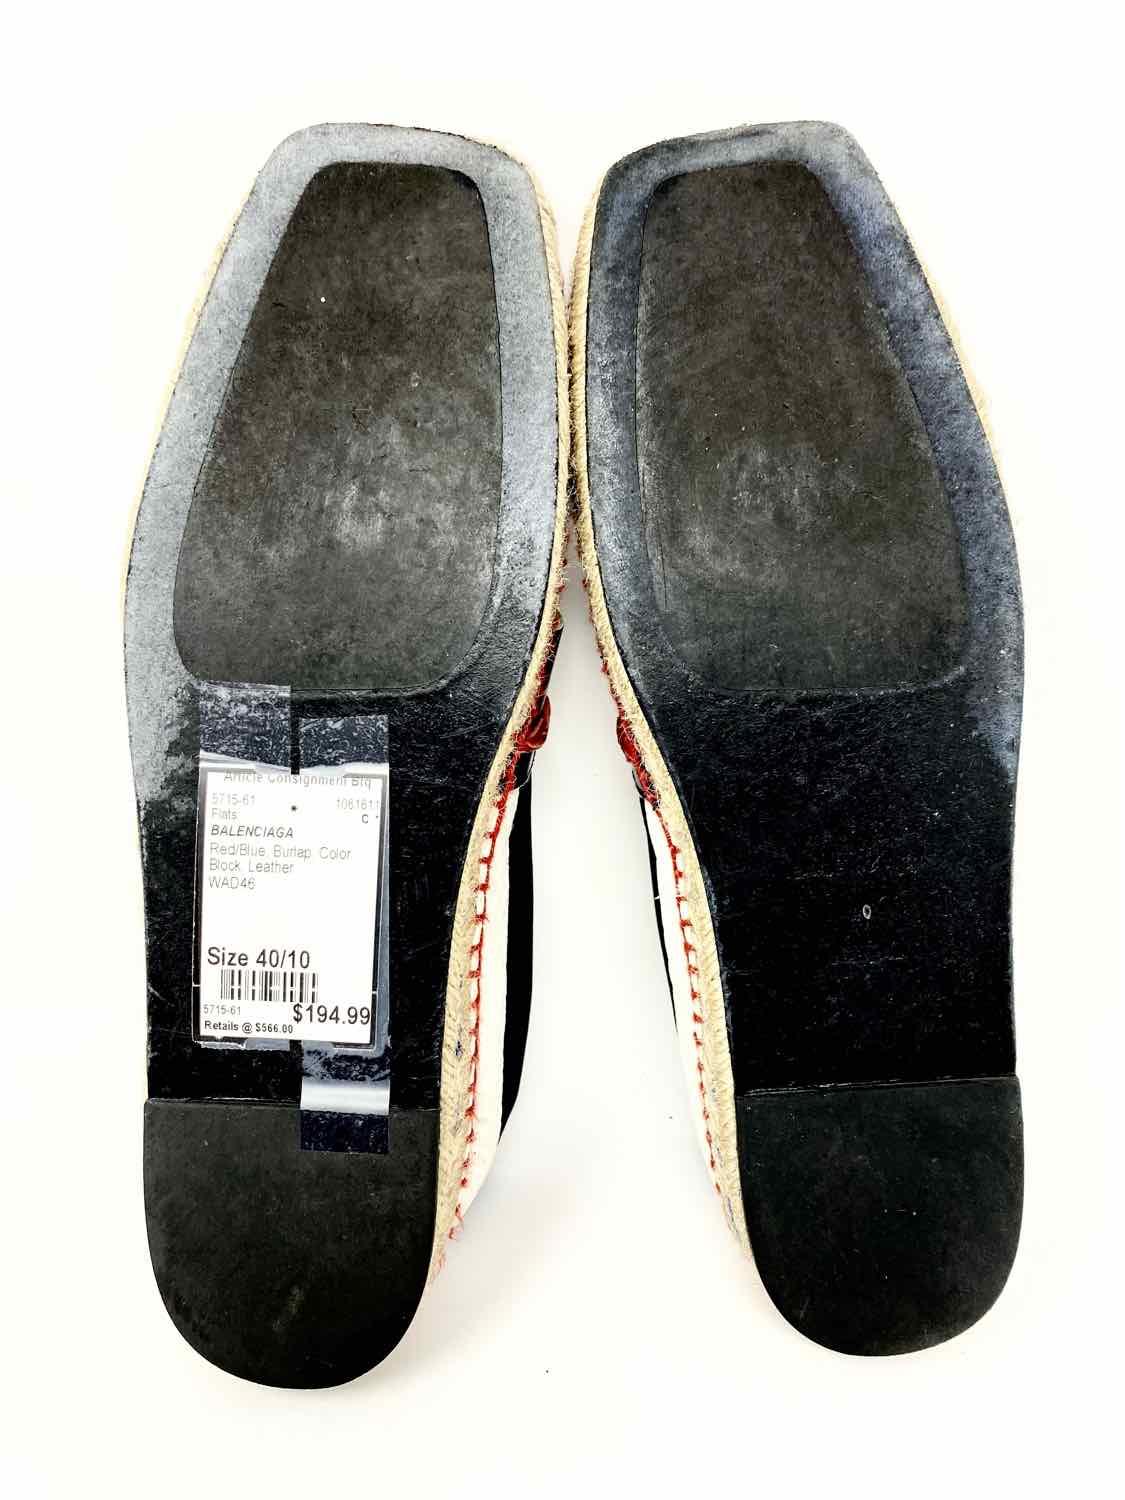 BALENCIAGA Shoe Size 40/10 Red/Blue Color Block Leather Flats - Article Consignment